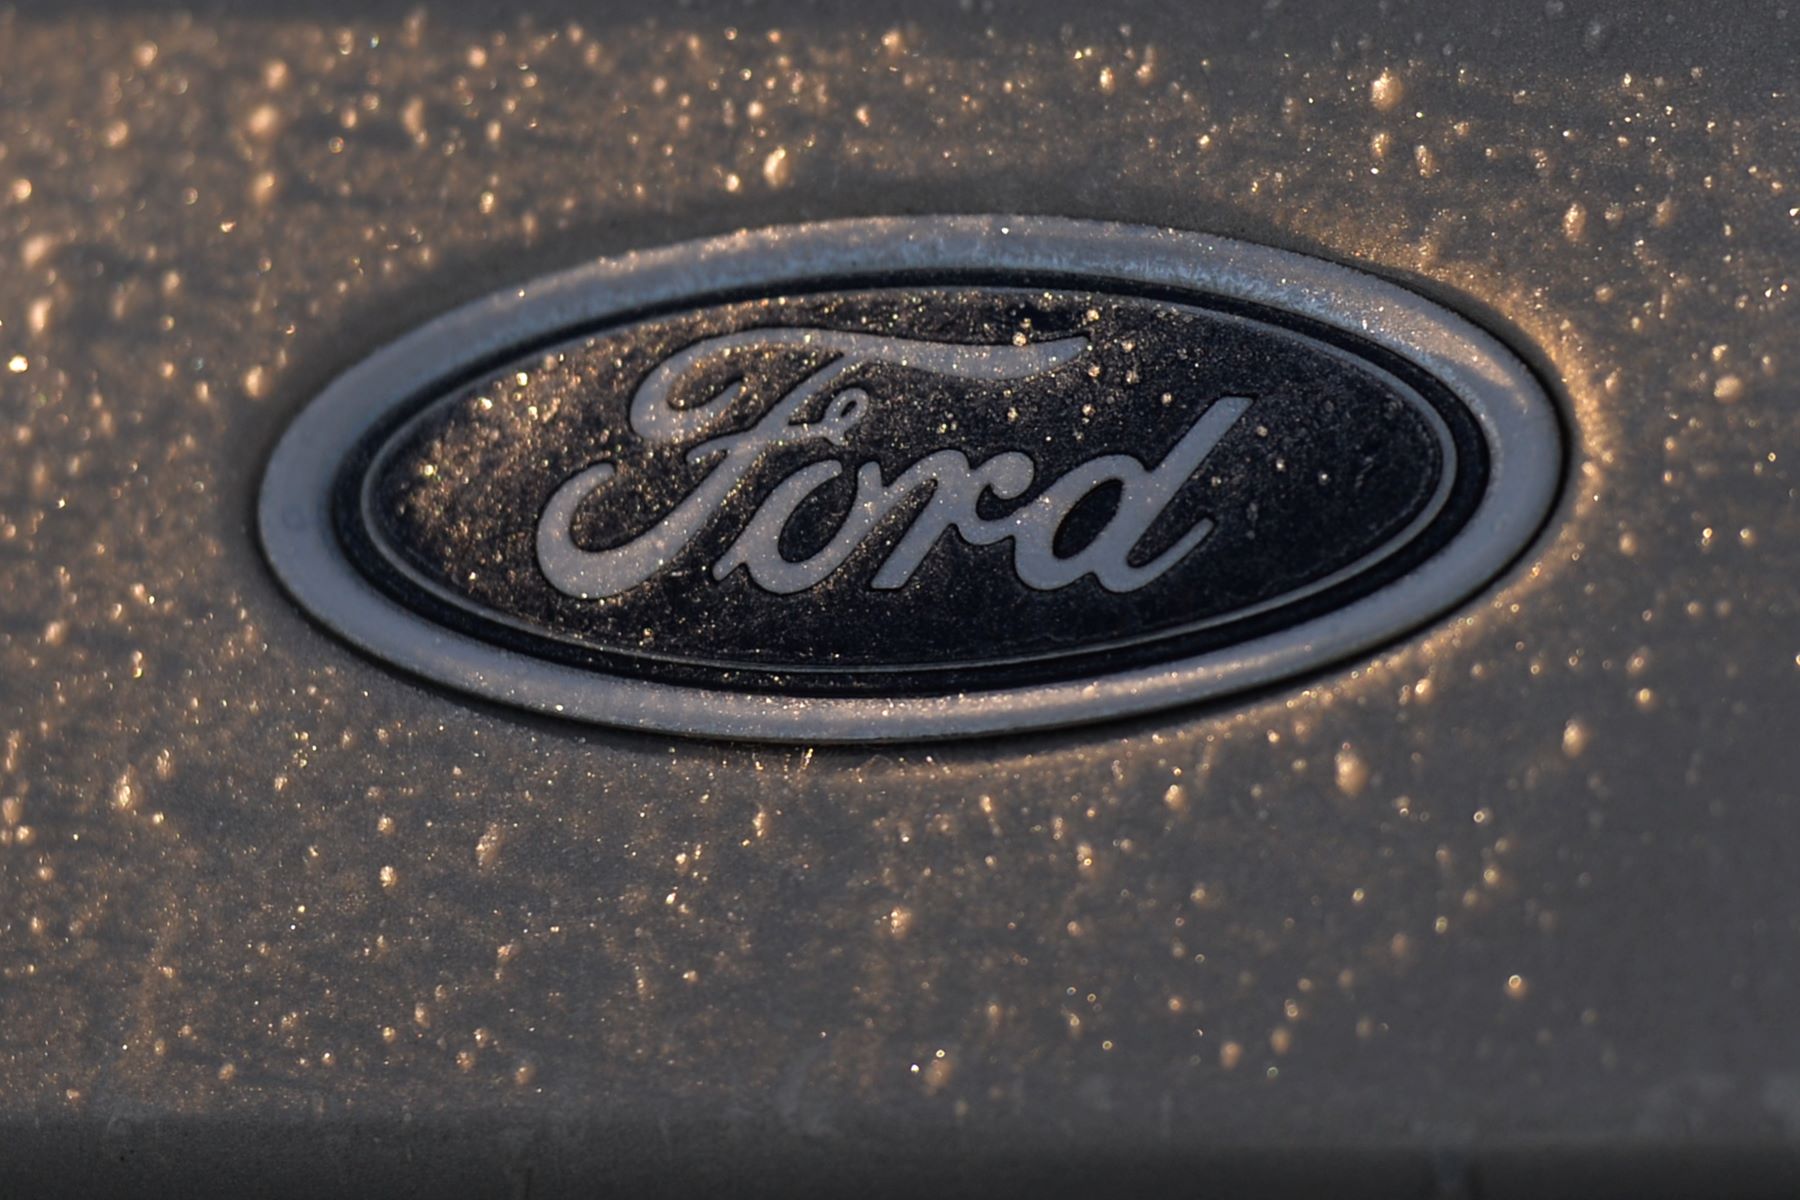 The Ford logo on a parked car in Dublin, Ireland